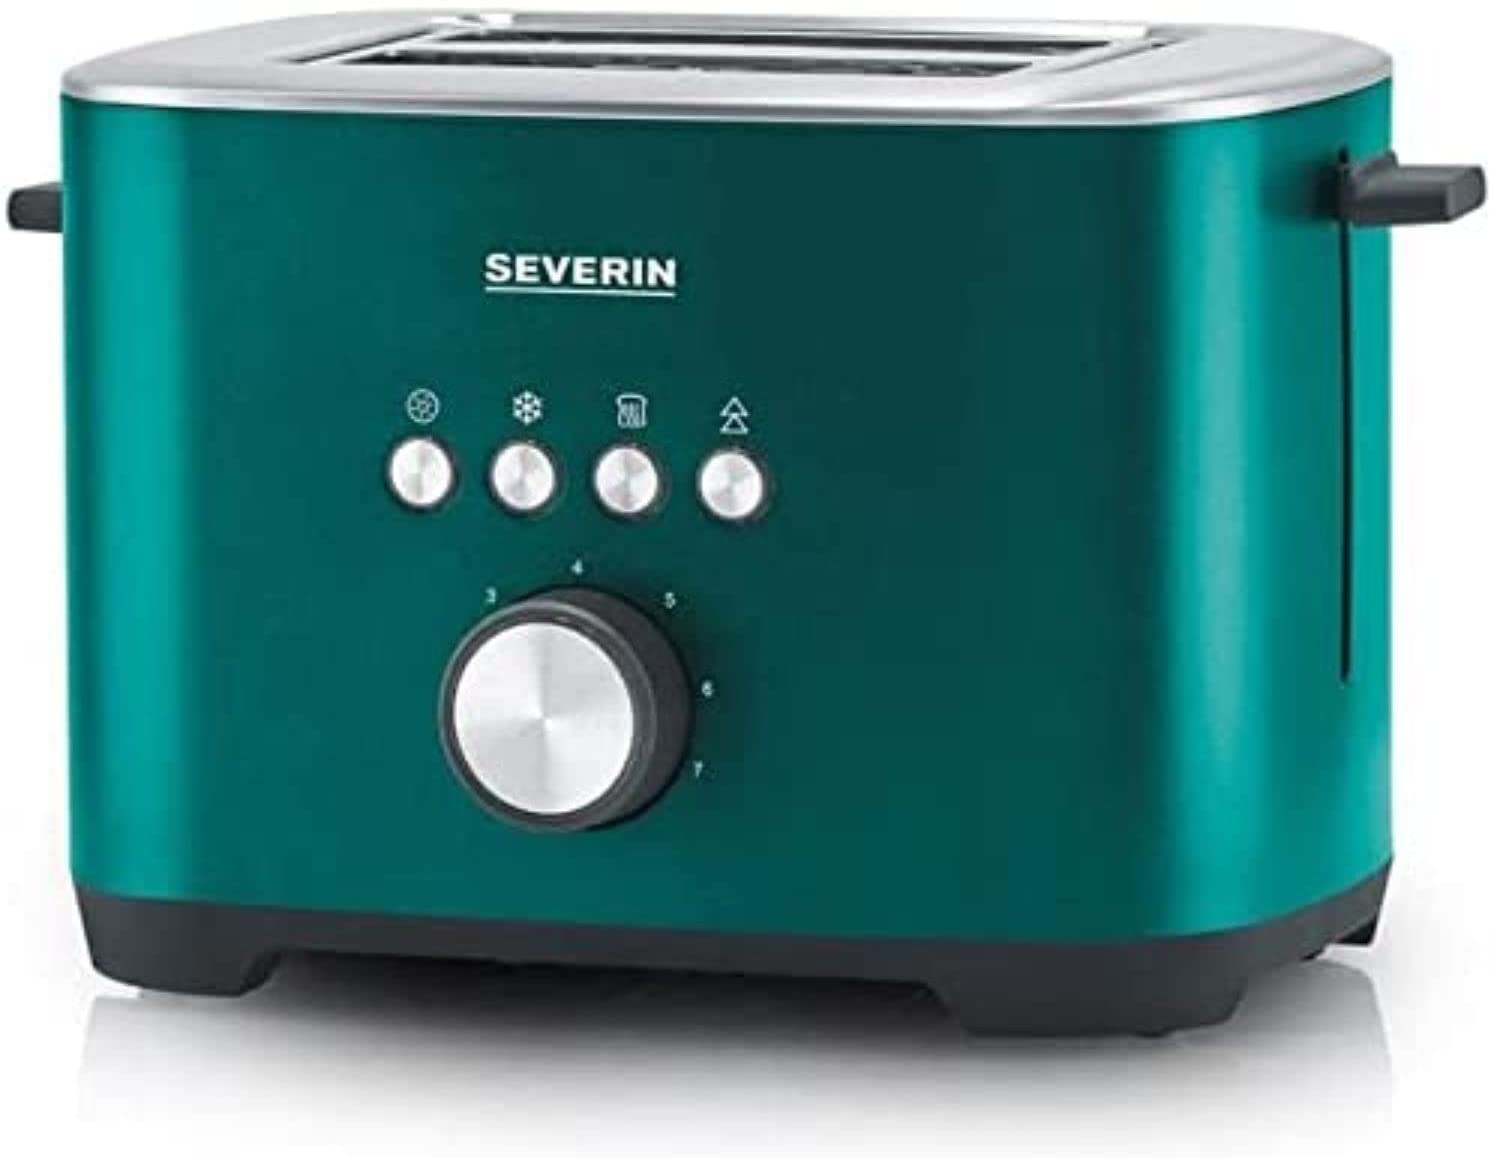 SEVERIN Toaster with Bagel Function, Toaster with Bread Attachment, High-Quality Stainless Steel Toaster for Toasting, Defrosting and Heating, 800 W, Matt Green, AT 9266